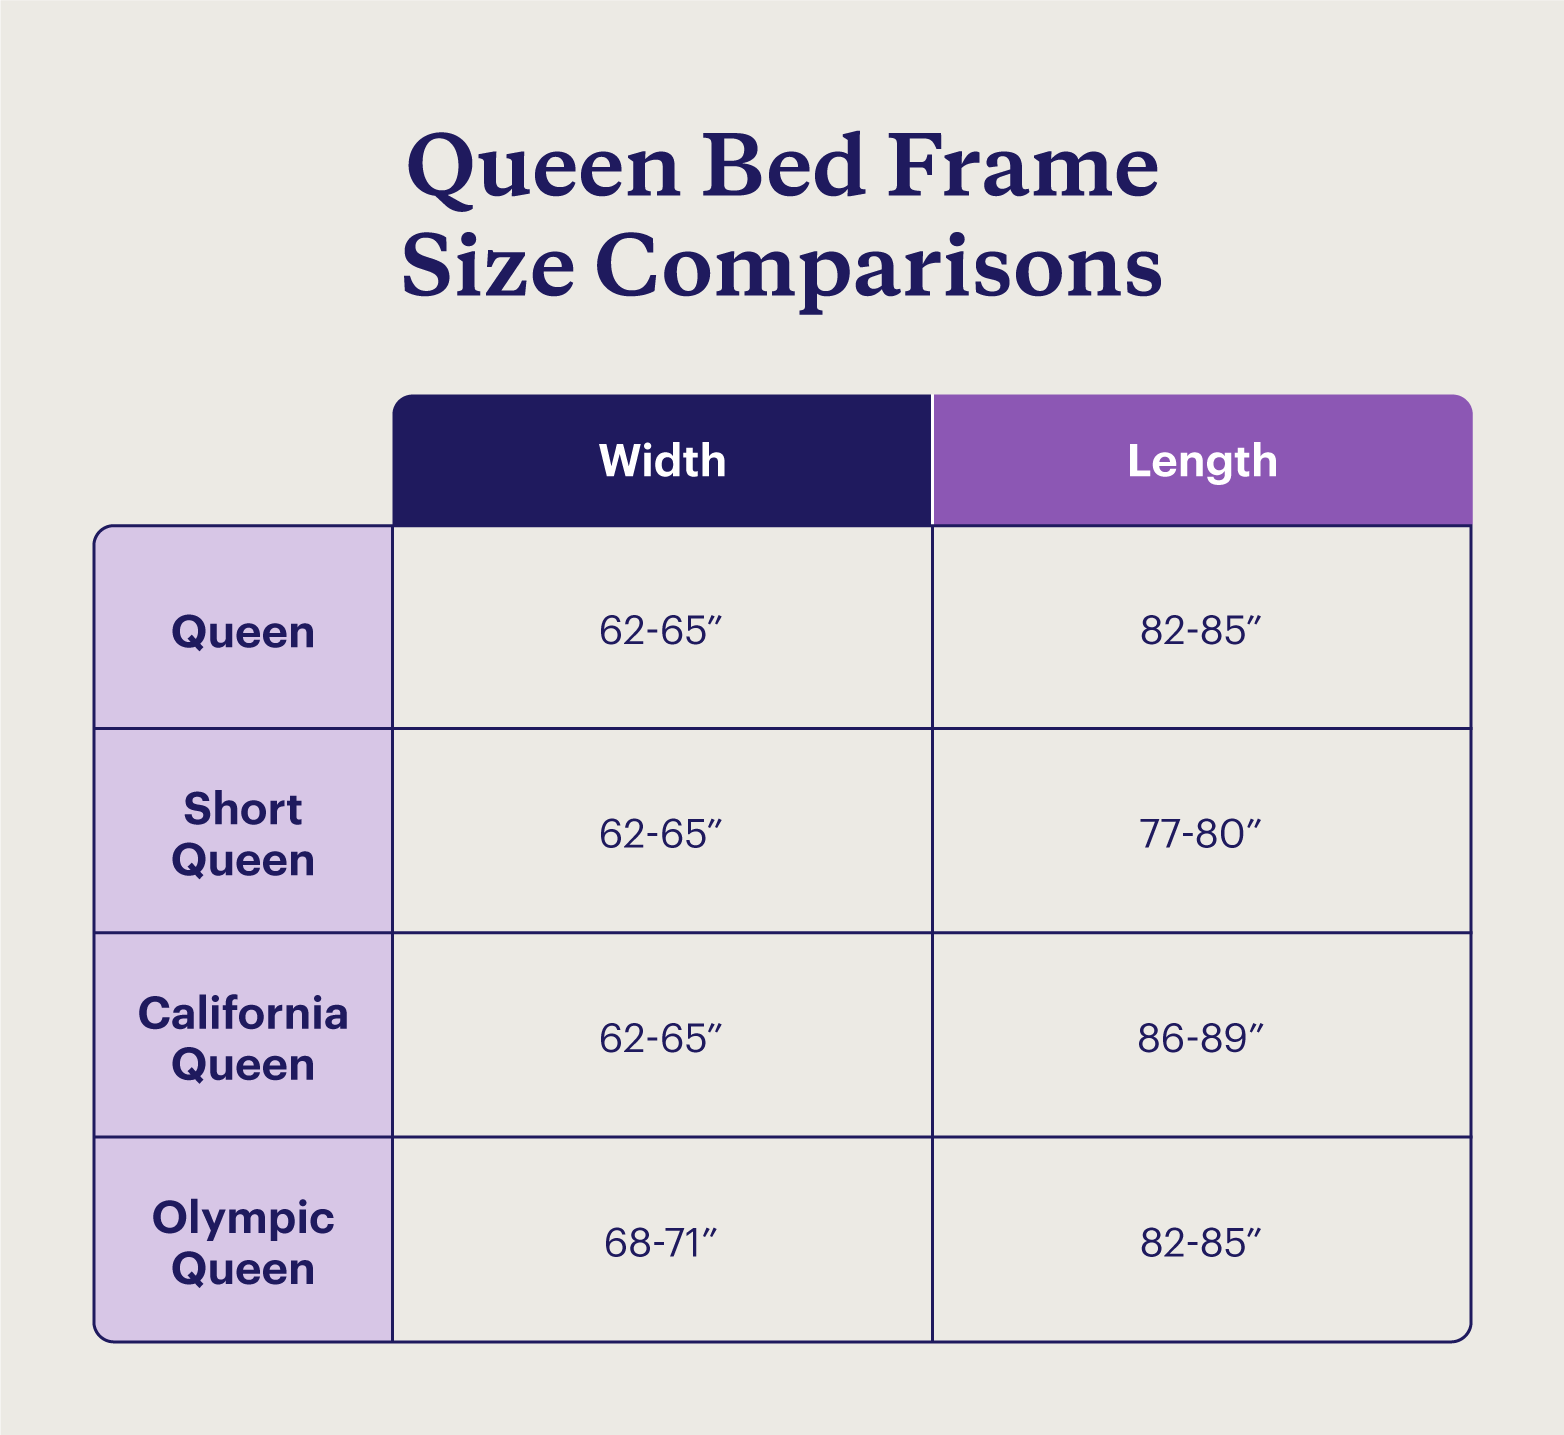 A chart showing four common queen bed frame dimensions — the queen, short queen, California queen, and Olympic queen.